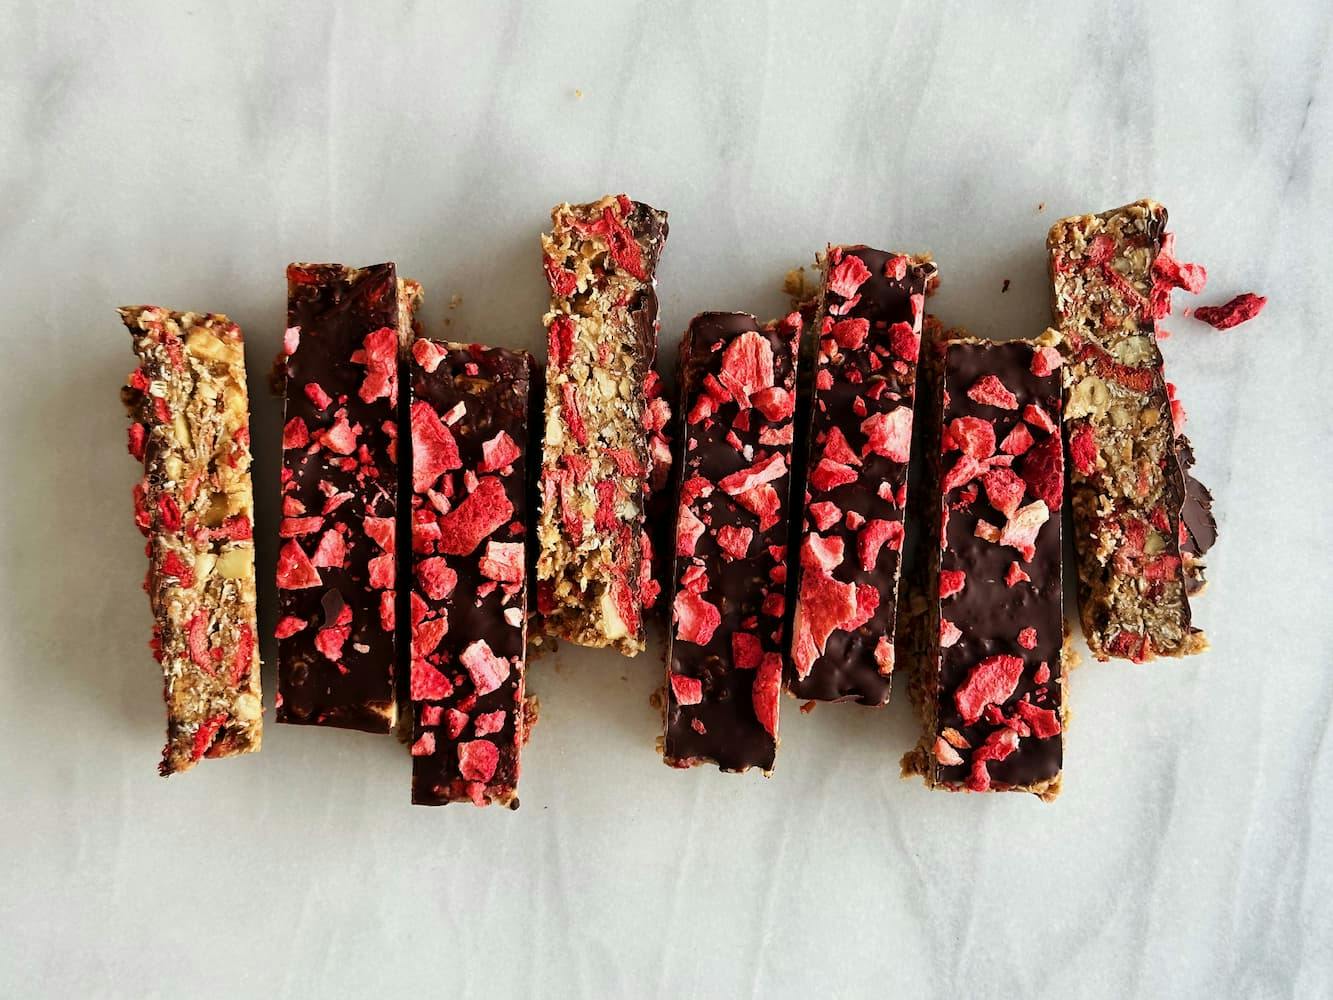 Lentine Alexis' Protein-Rich Nut Butter + Berry Breakfast Bars 